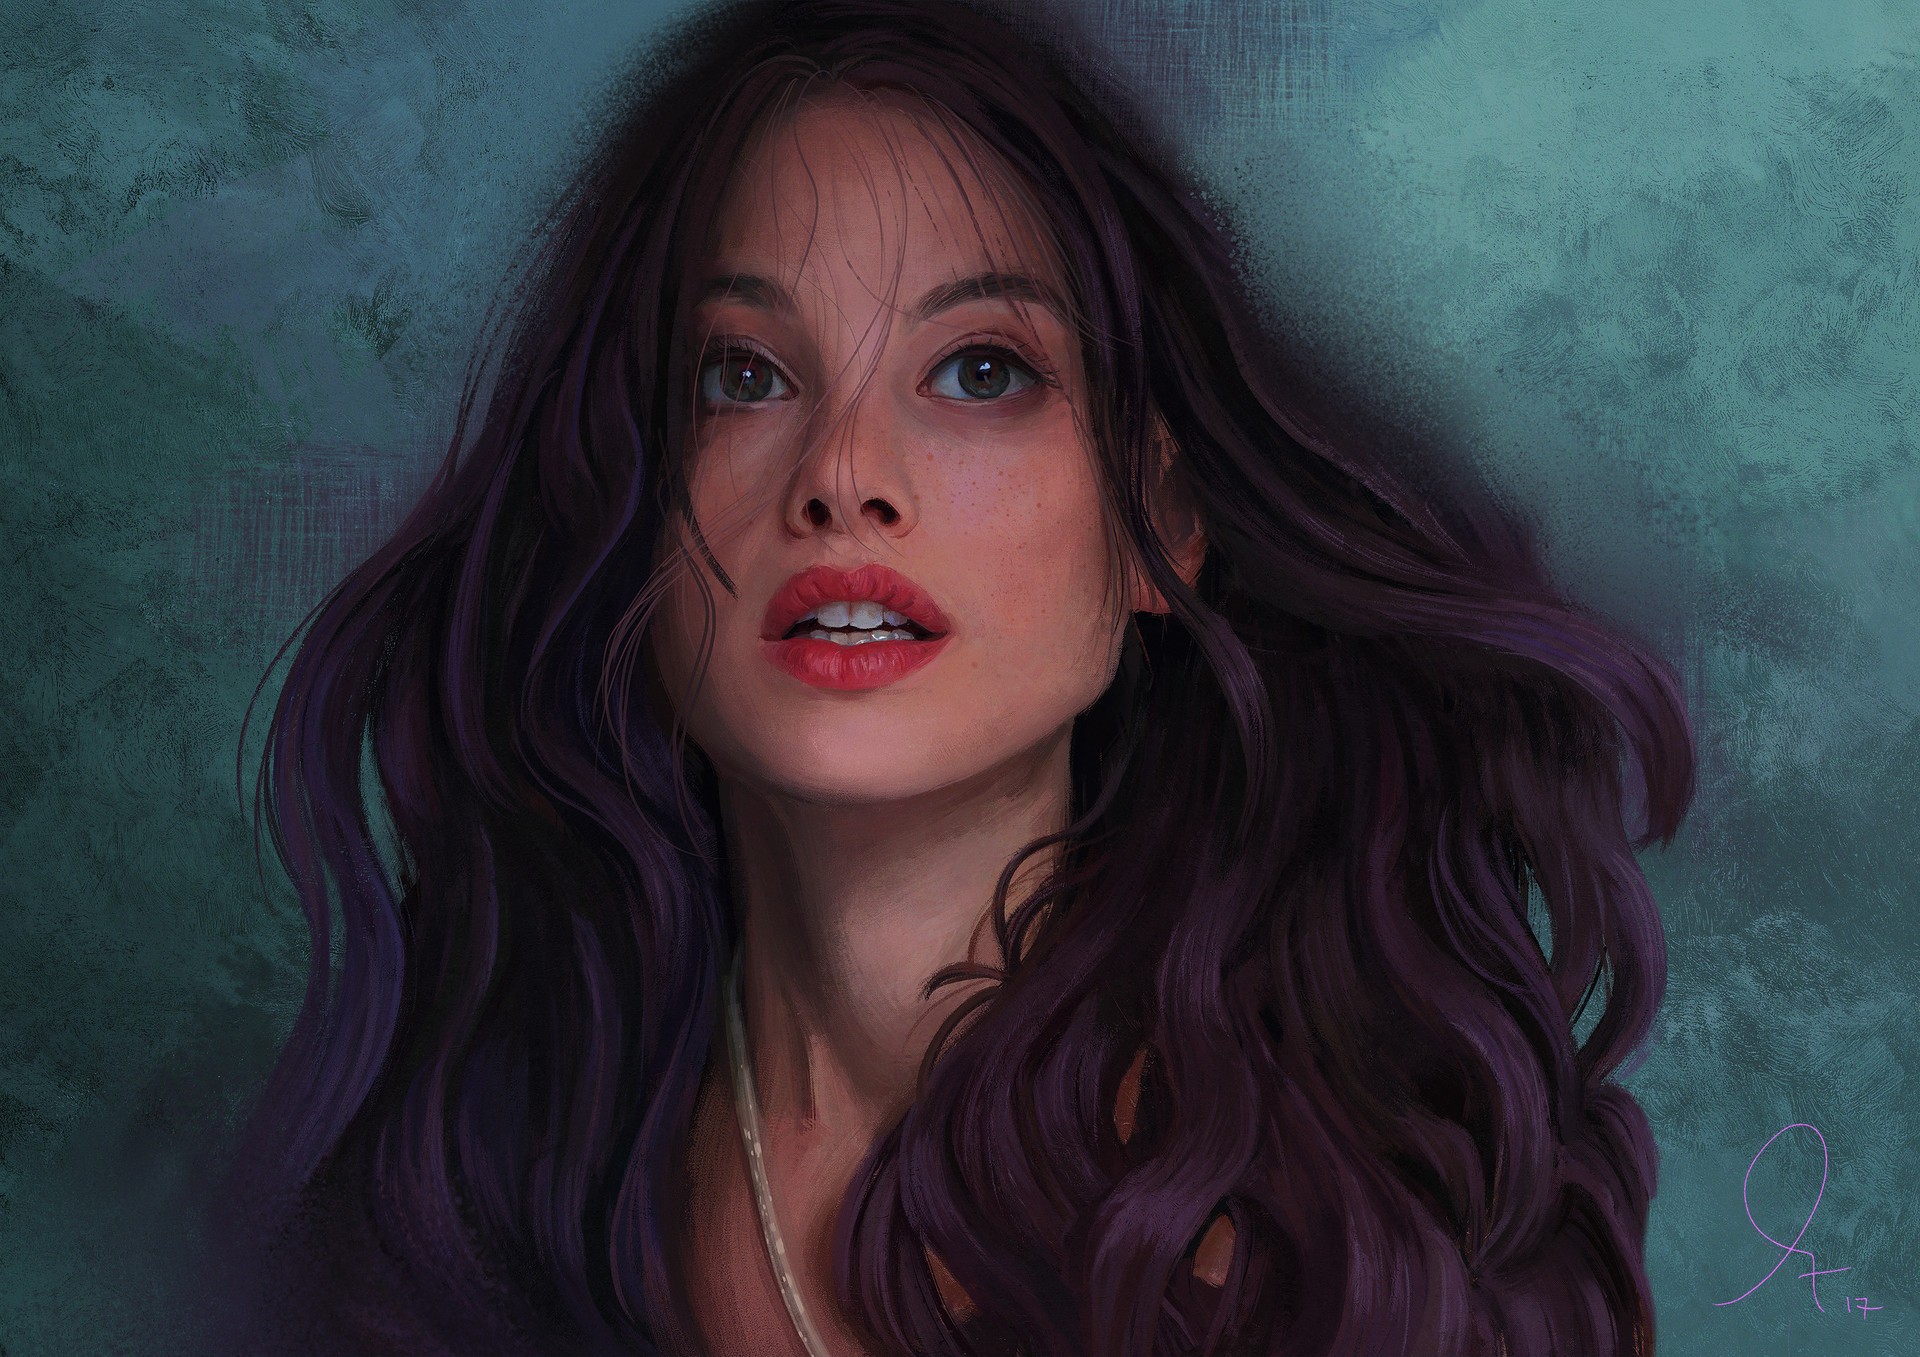 Artistic Woman Girl Brunette Painting Face Astrid Berges Frisbey 1920x1357